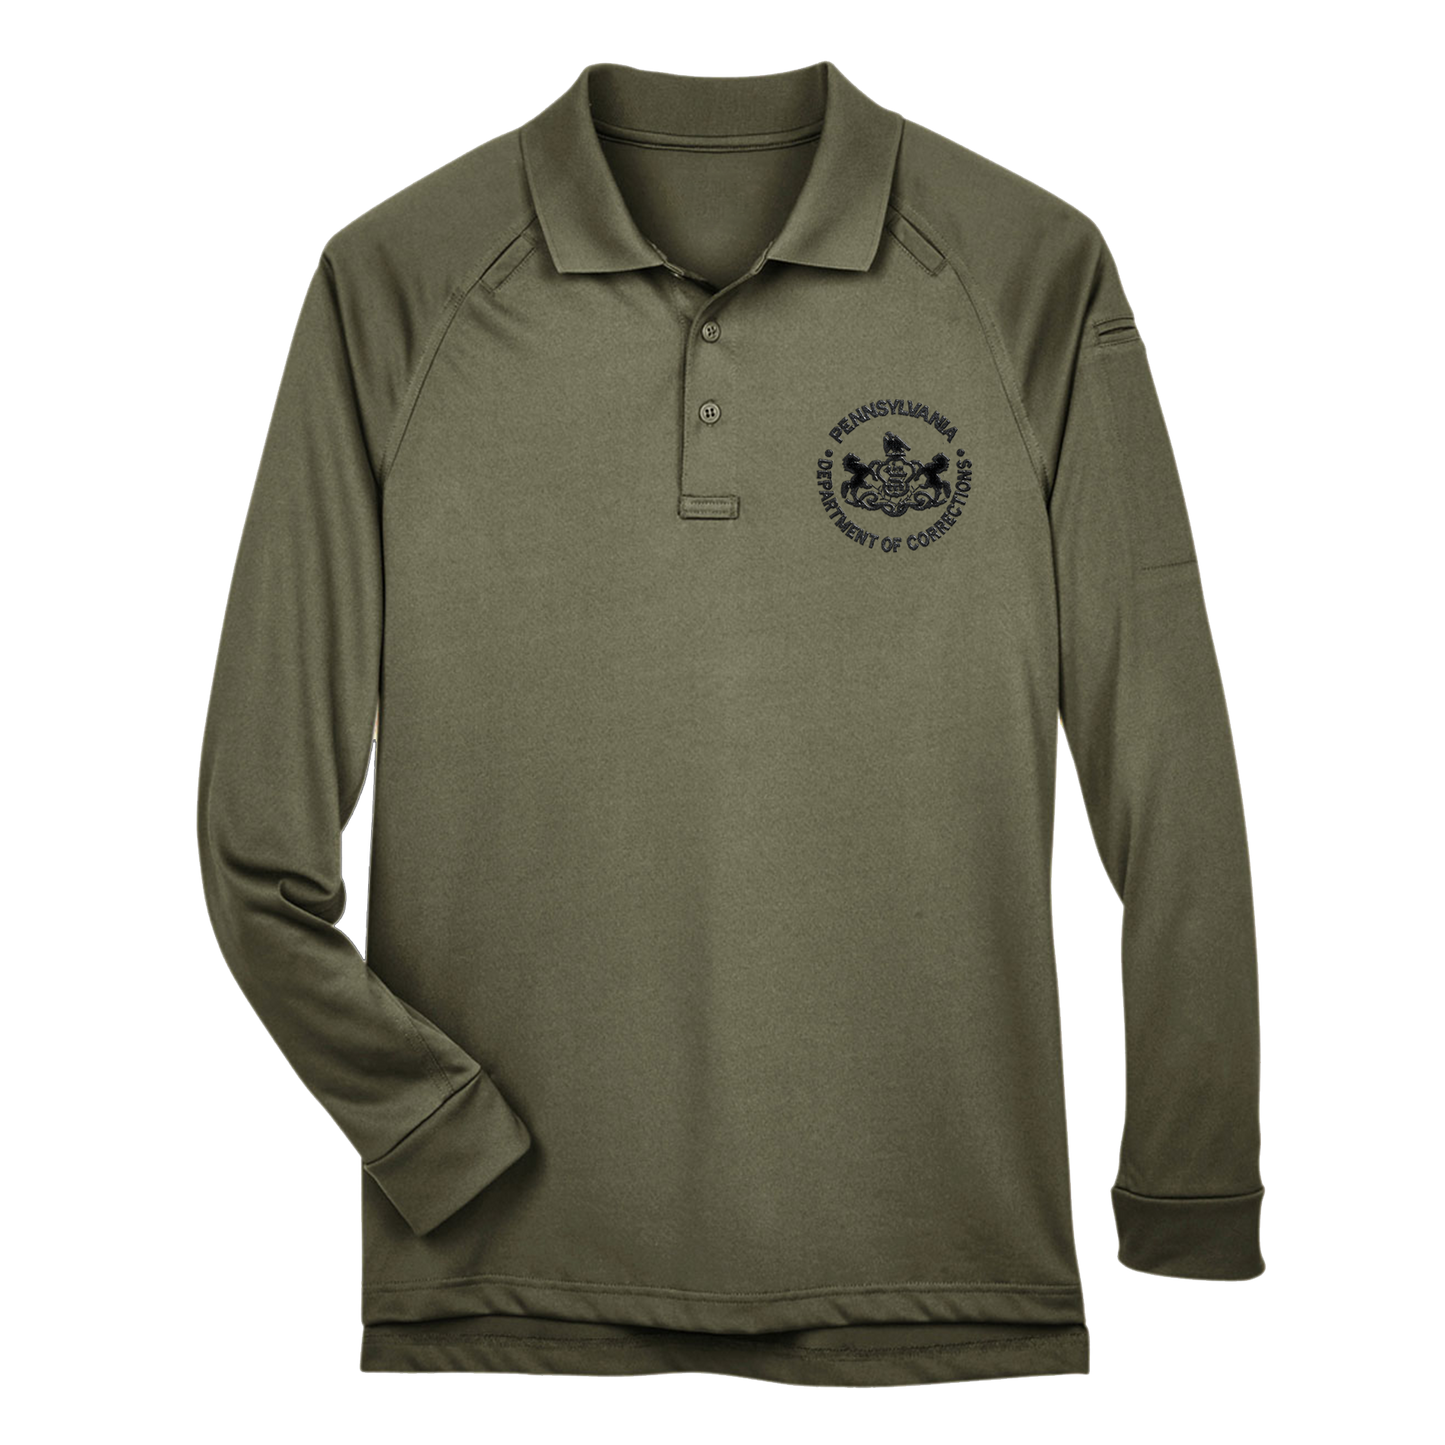 Adult Tactical Long-Sleeve Polo with Embroidered Department of Corrections Logos (Various Colors)